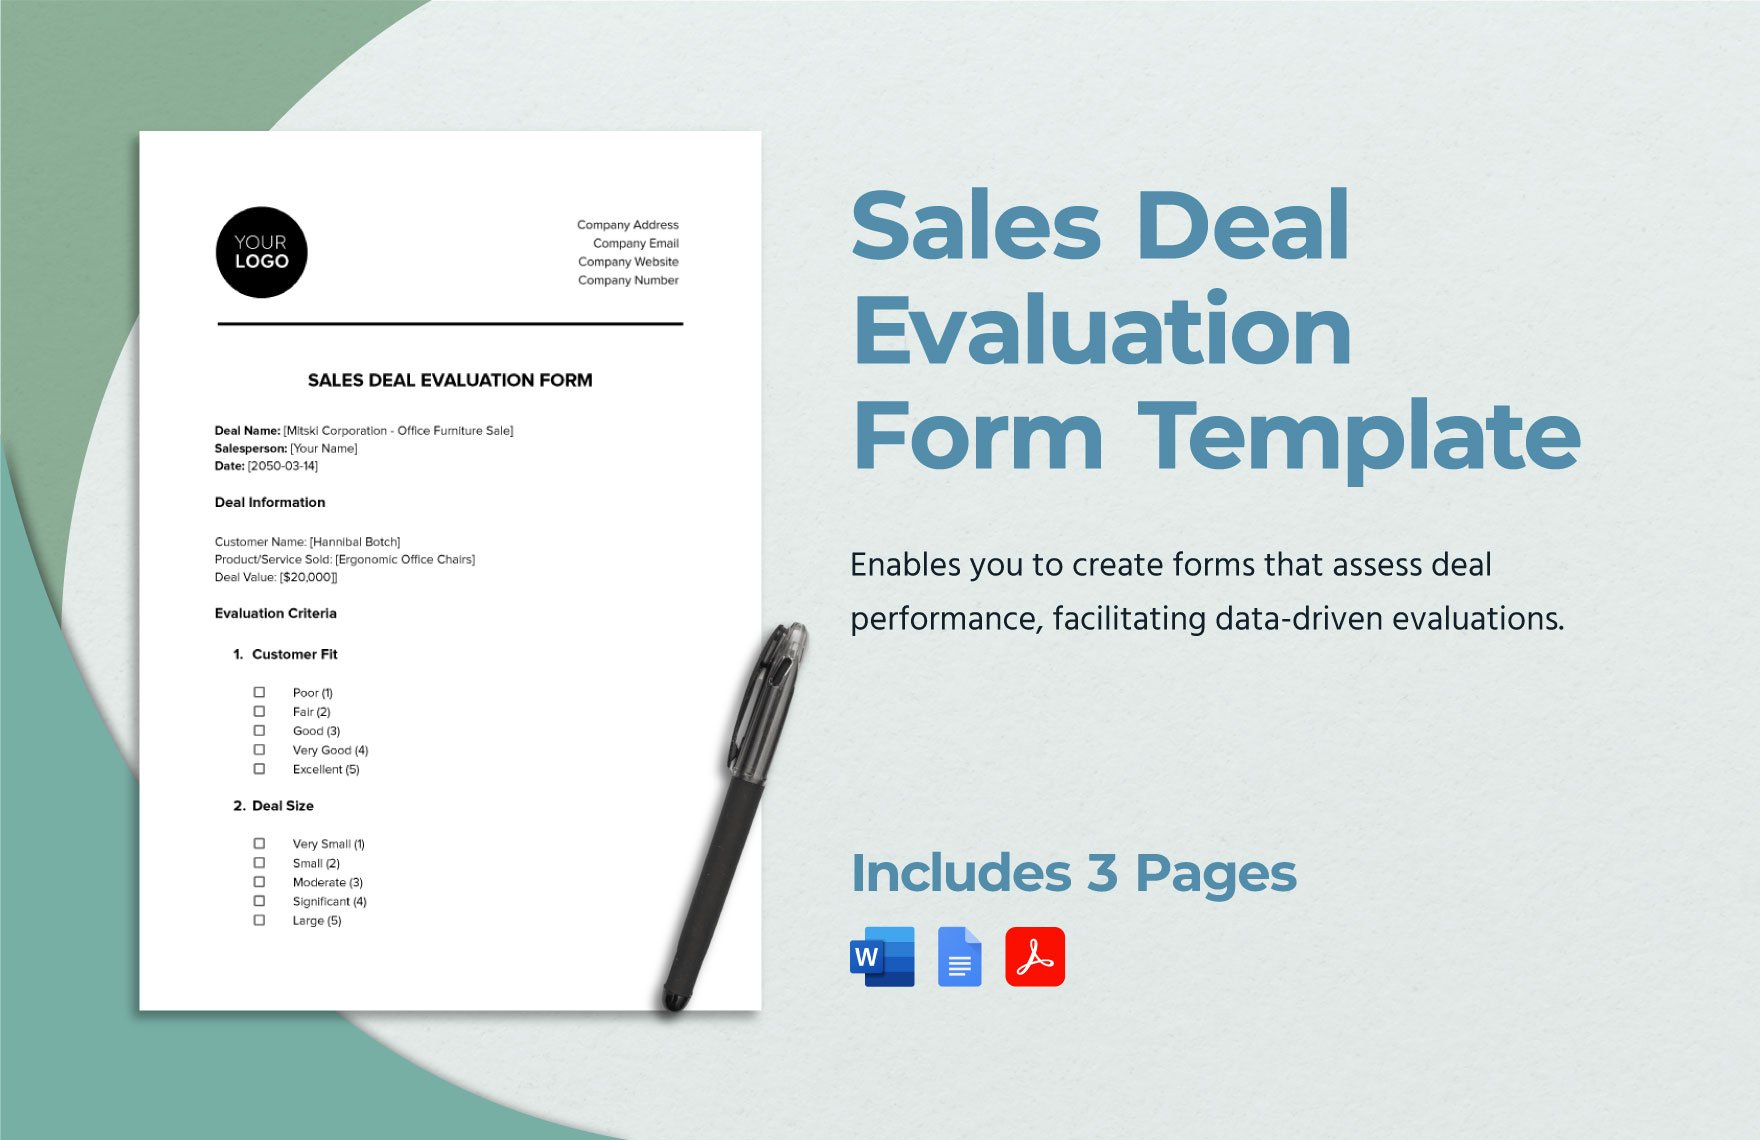 Sales Deal Evaluation Form Template in Word, Google Docs, PDF